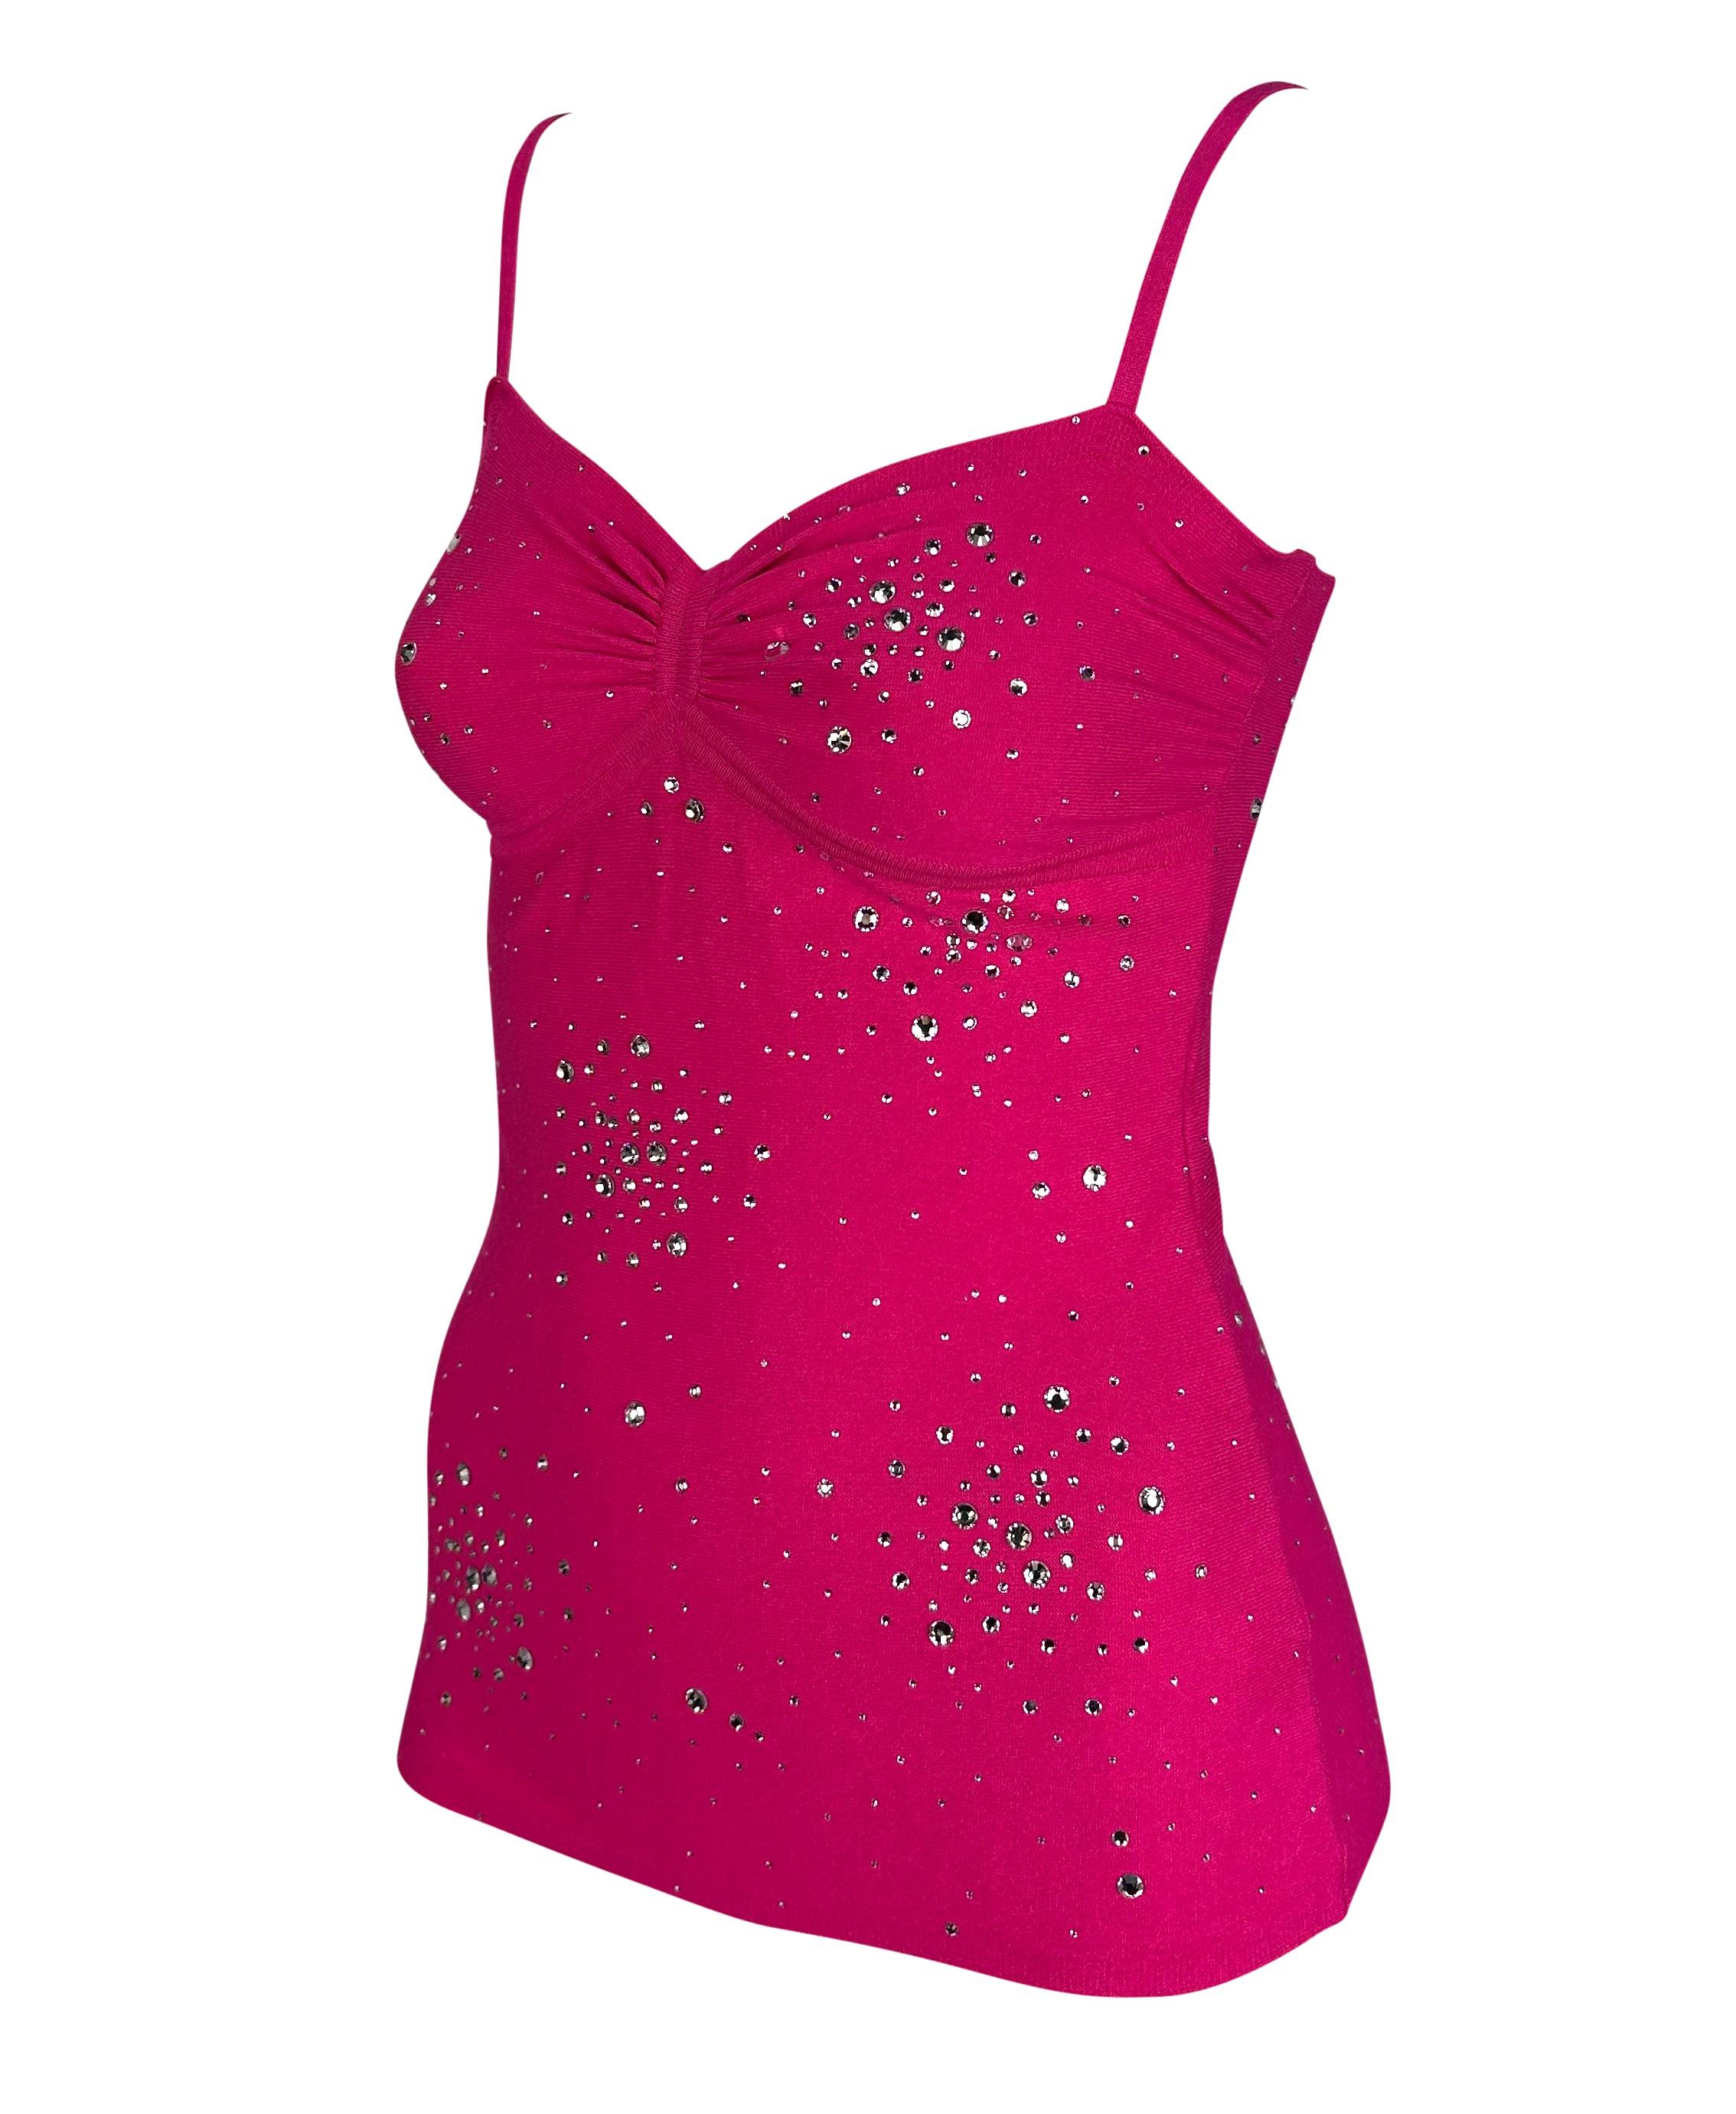 Presenting a fabulous bright pink knit Versace tank top designed by Donatella Versace. From the Spring/Summer 2004 collection, this beautiful top features spaghetti straps and ruching between the breasts, and it is covered with crystal